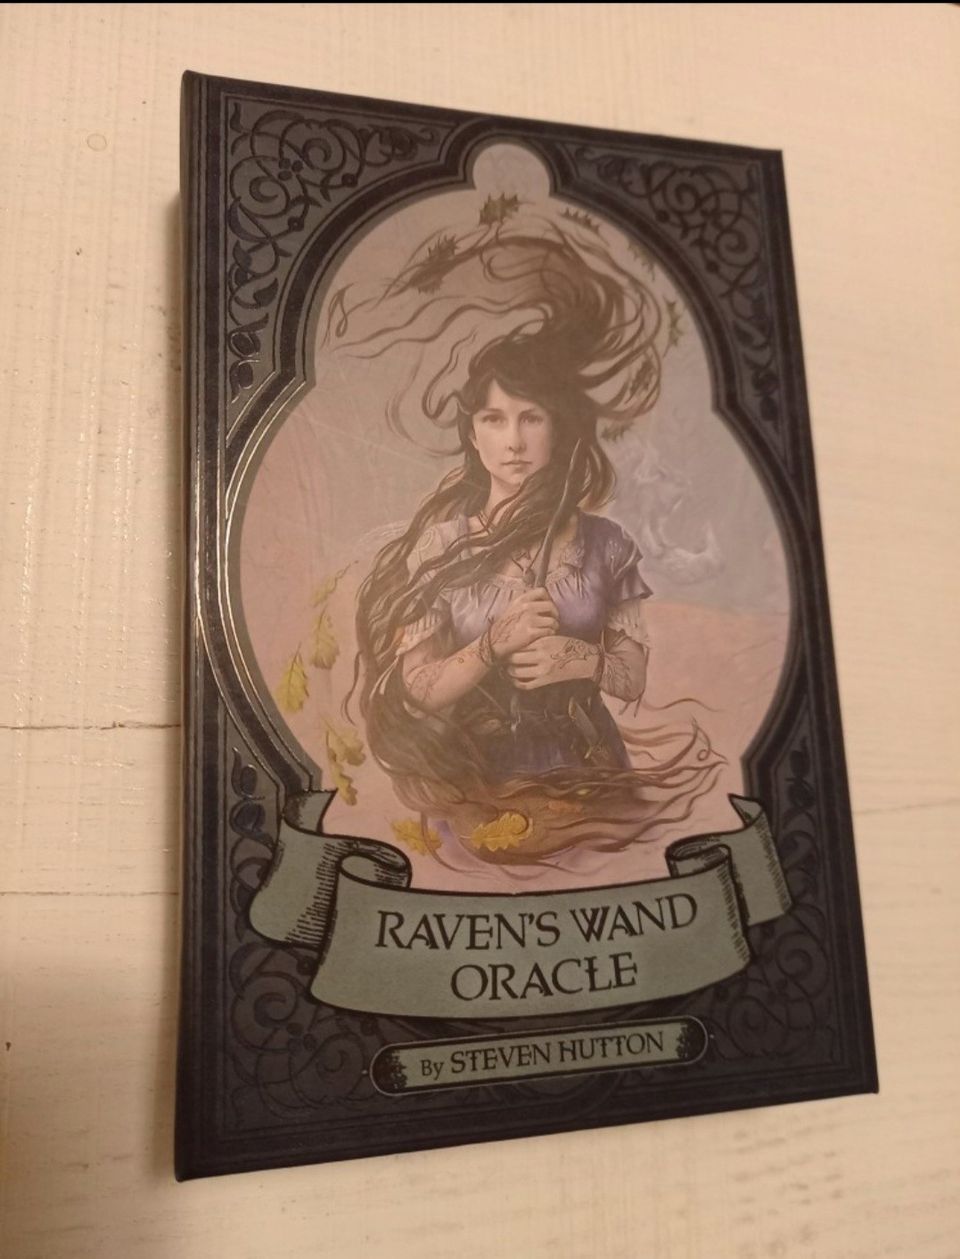 Raven's wand Oracle cards